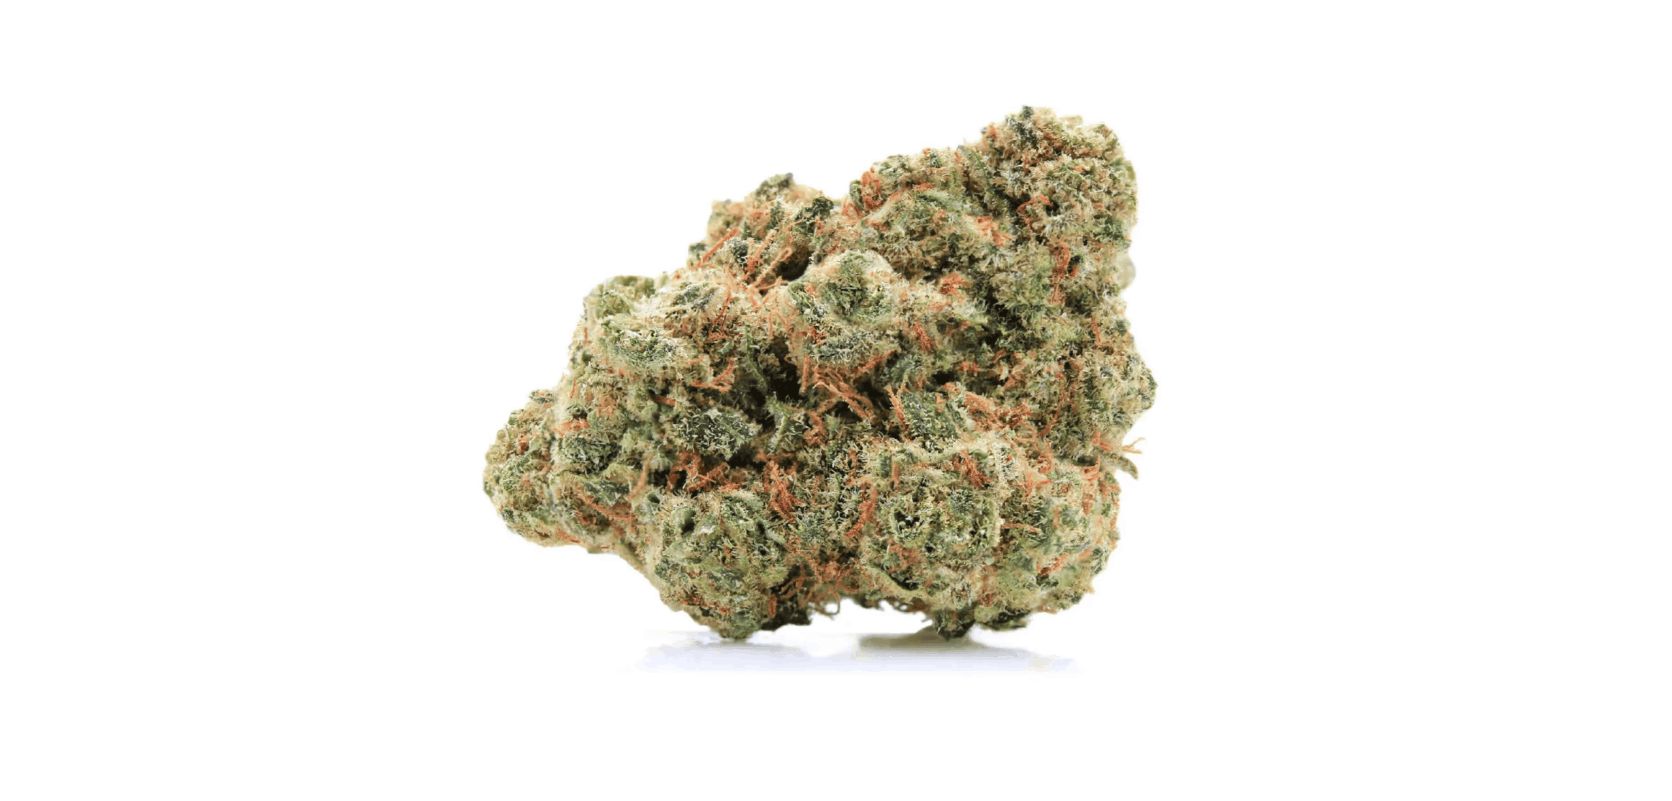 The Rockstar Kush strain is known for its rich terpene profile, characterized primarily by a fusion of Myrcene, Limonene, and Caryophyllene. 